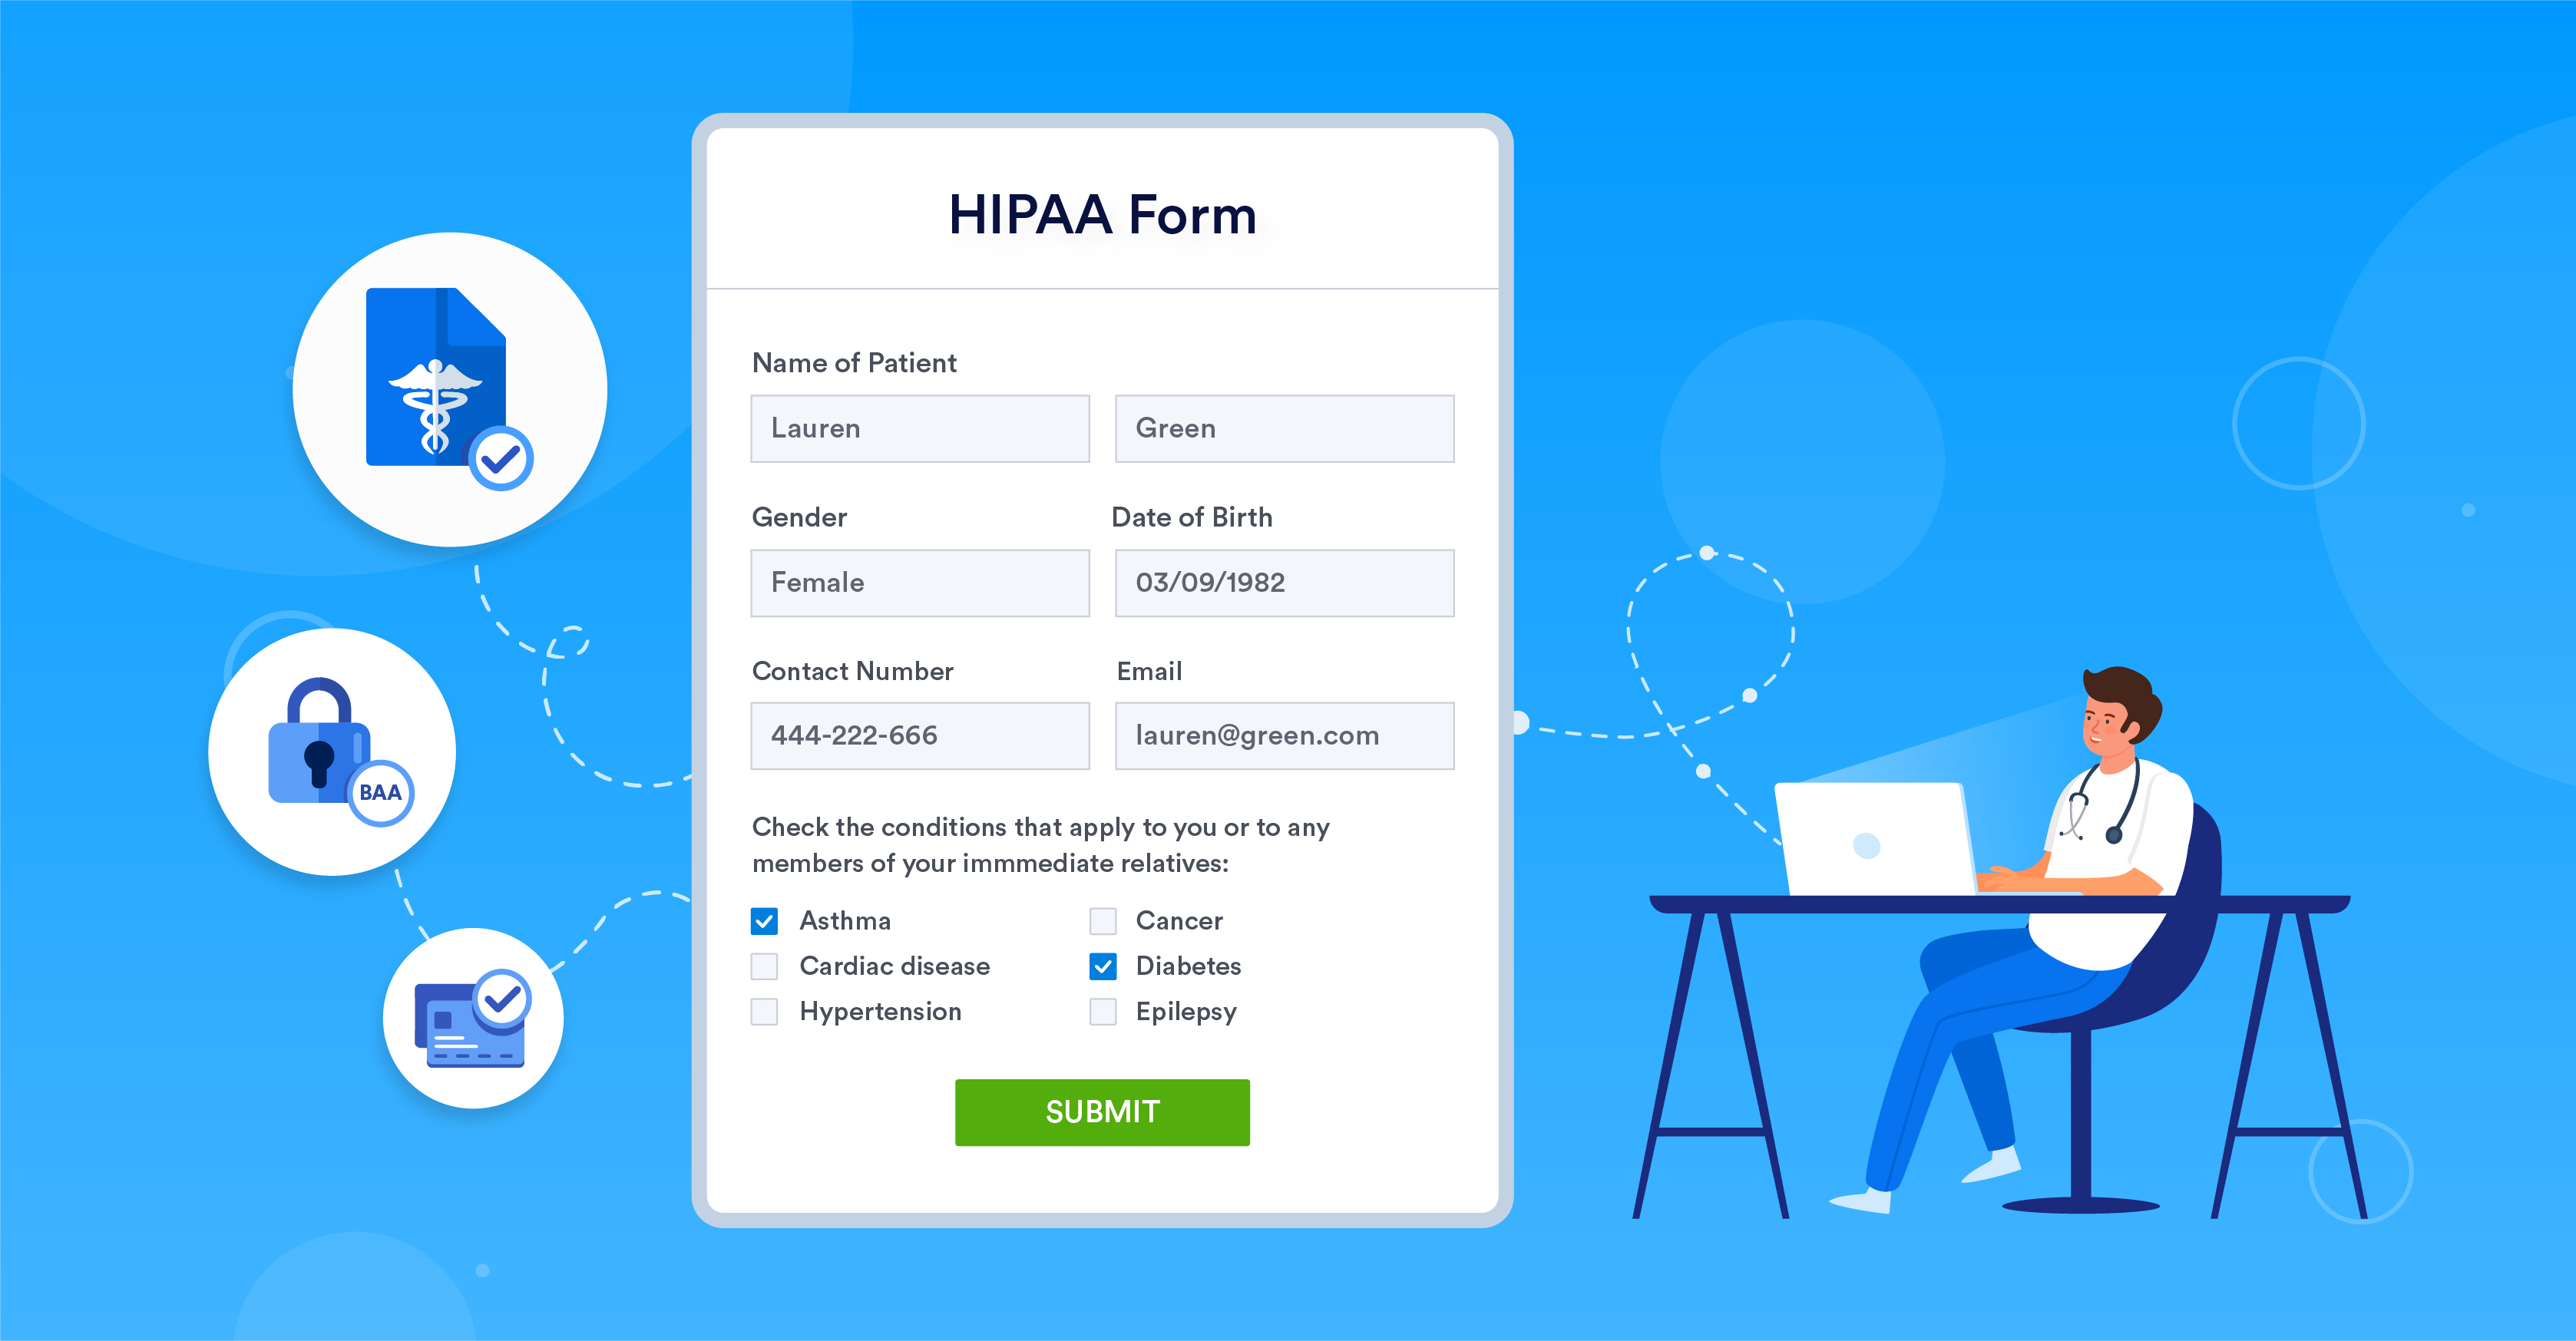 Jotform provides HIPAA-compliant forms and a business associate agreement (BAA) so your organization can collect health information safely and securely.